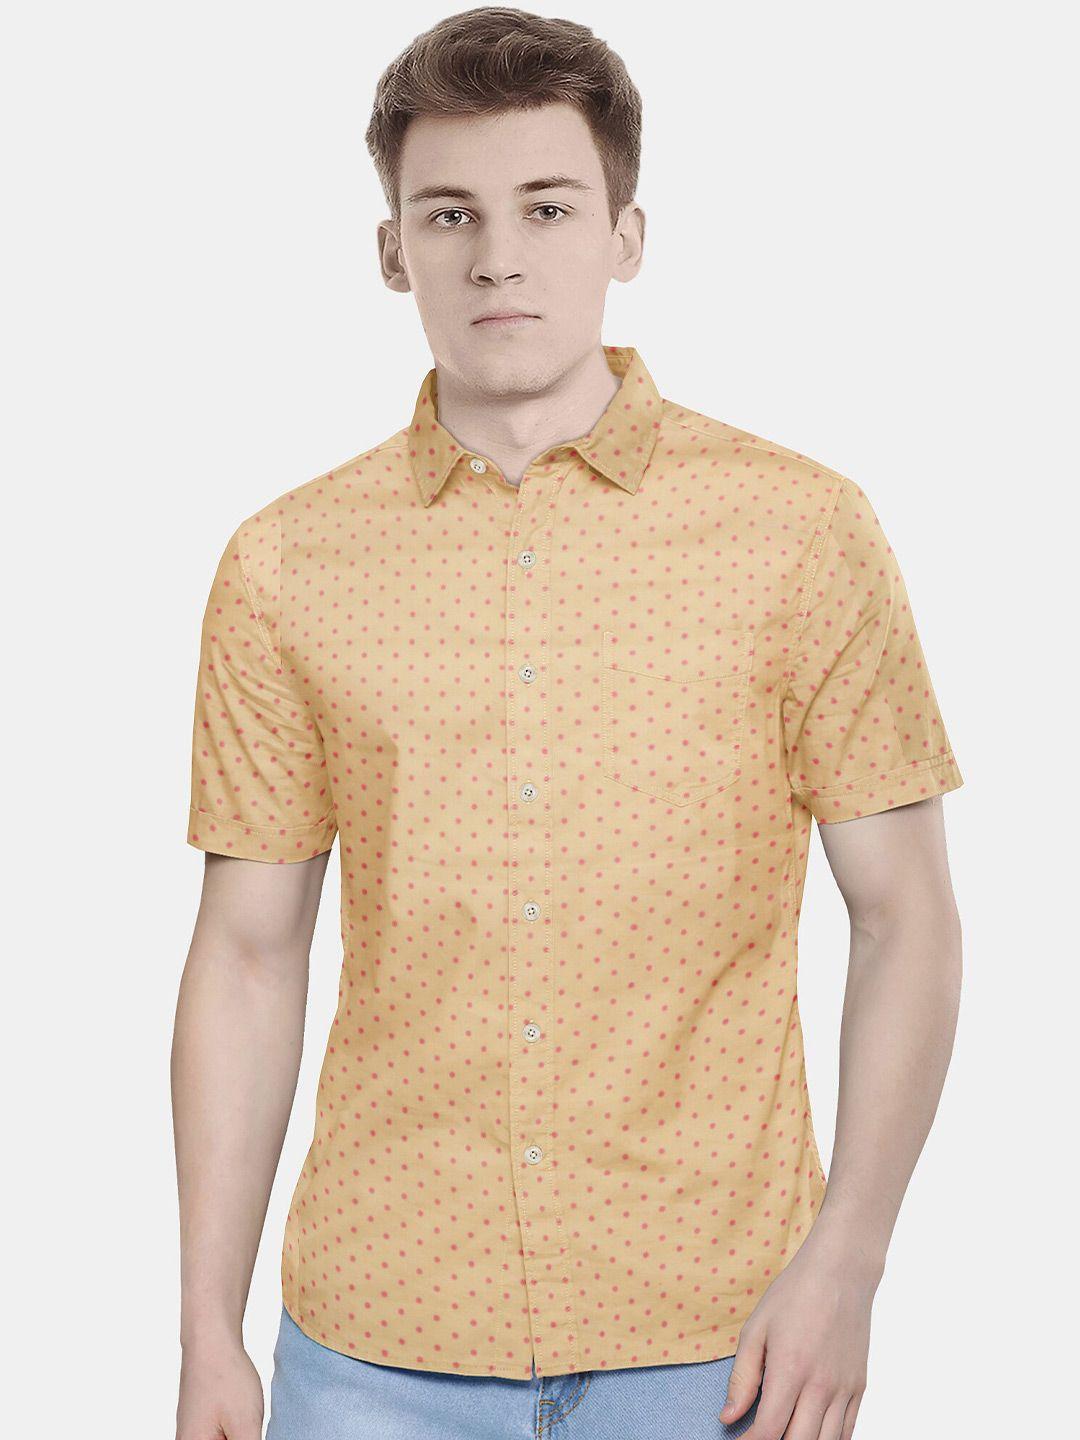 misbis relaxed slim fit opaque printed casual shirt